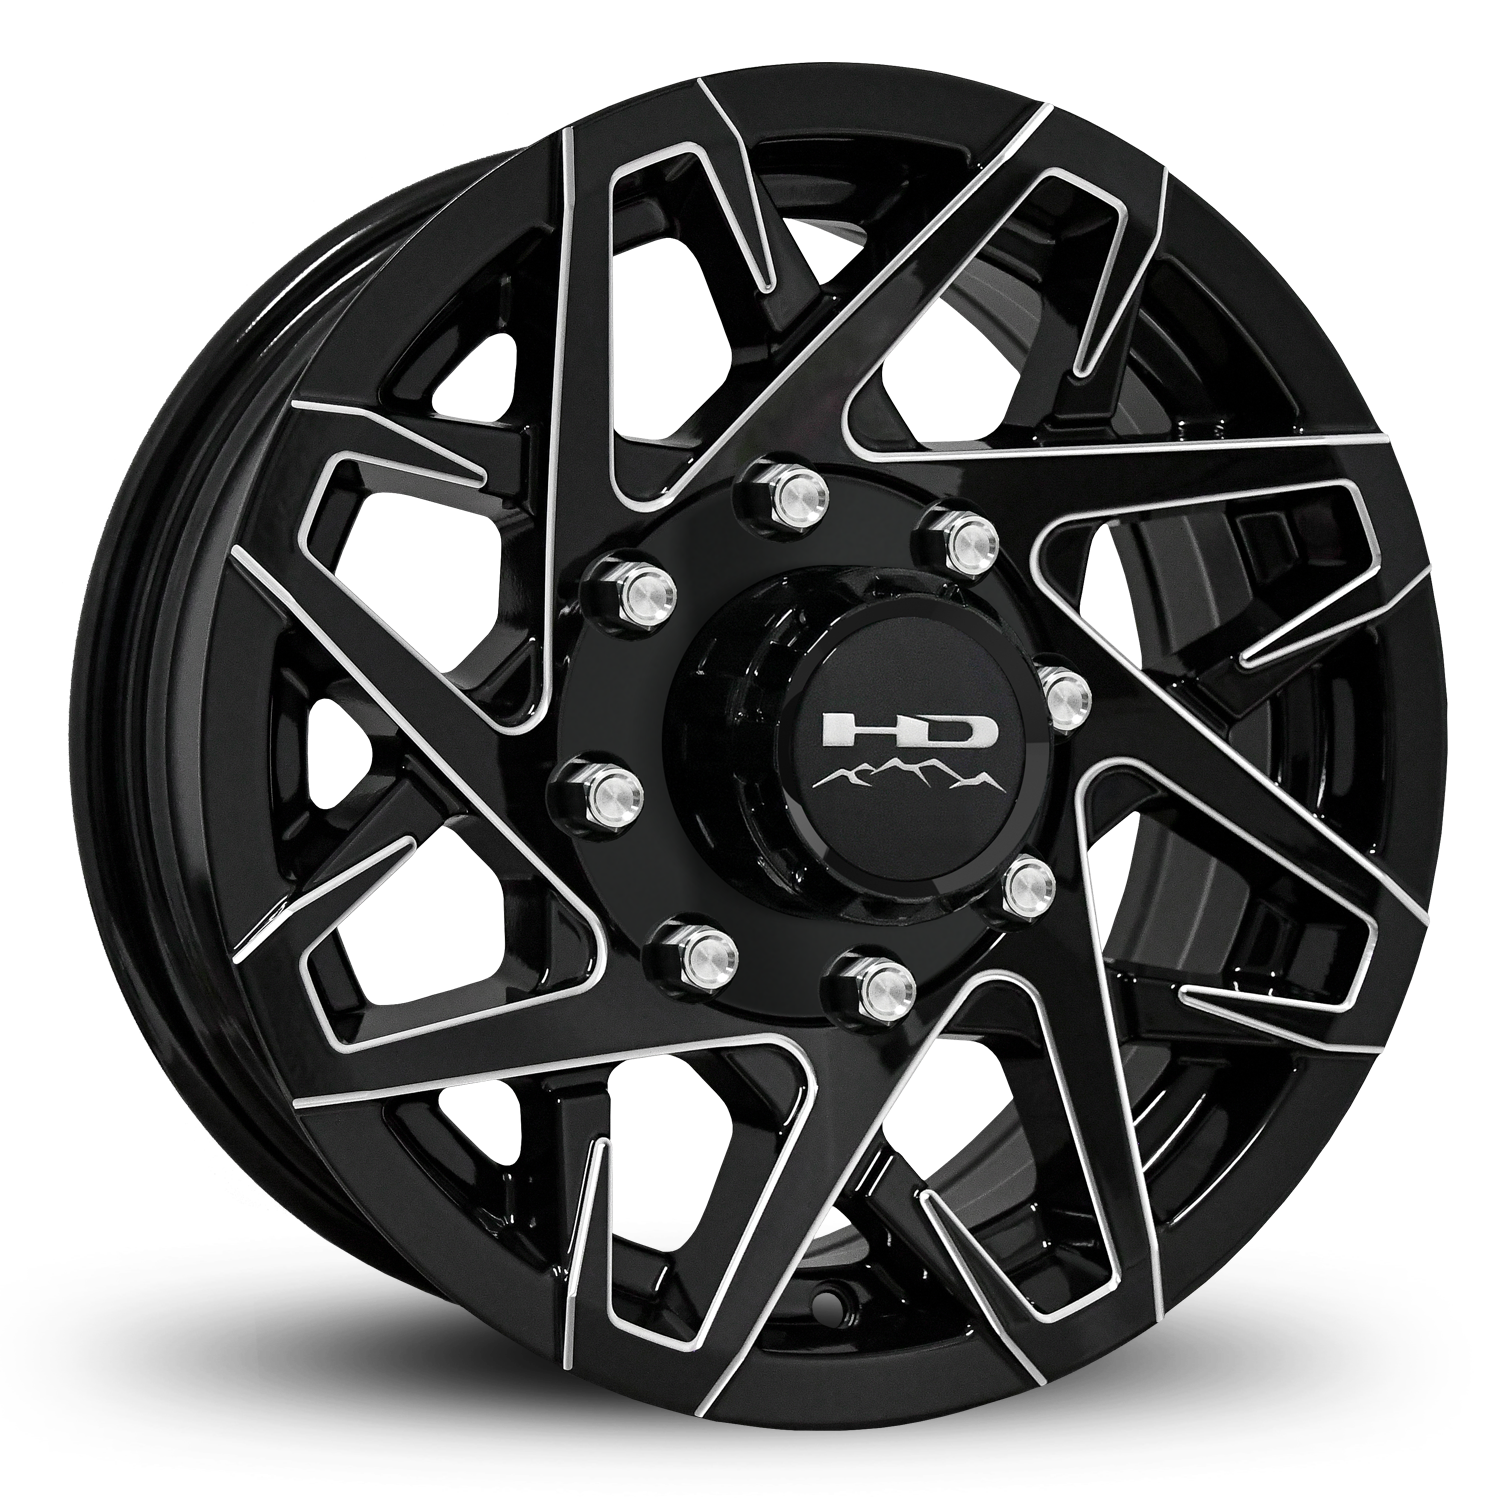 HD Off-Road Canyon Custom Trailer Wheel Rims in 16x6.0 16x6 Gloss Black CNC Milled Spoke Edges with Center Cap & Logo fits 8x6.50 / 8x165 Axle Boat, Car, RV, Travel, Concession, Horse, Utility, Lawn & Garden, & Landscaping.